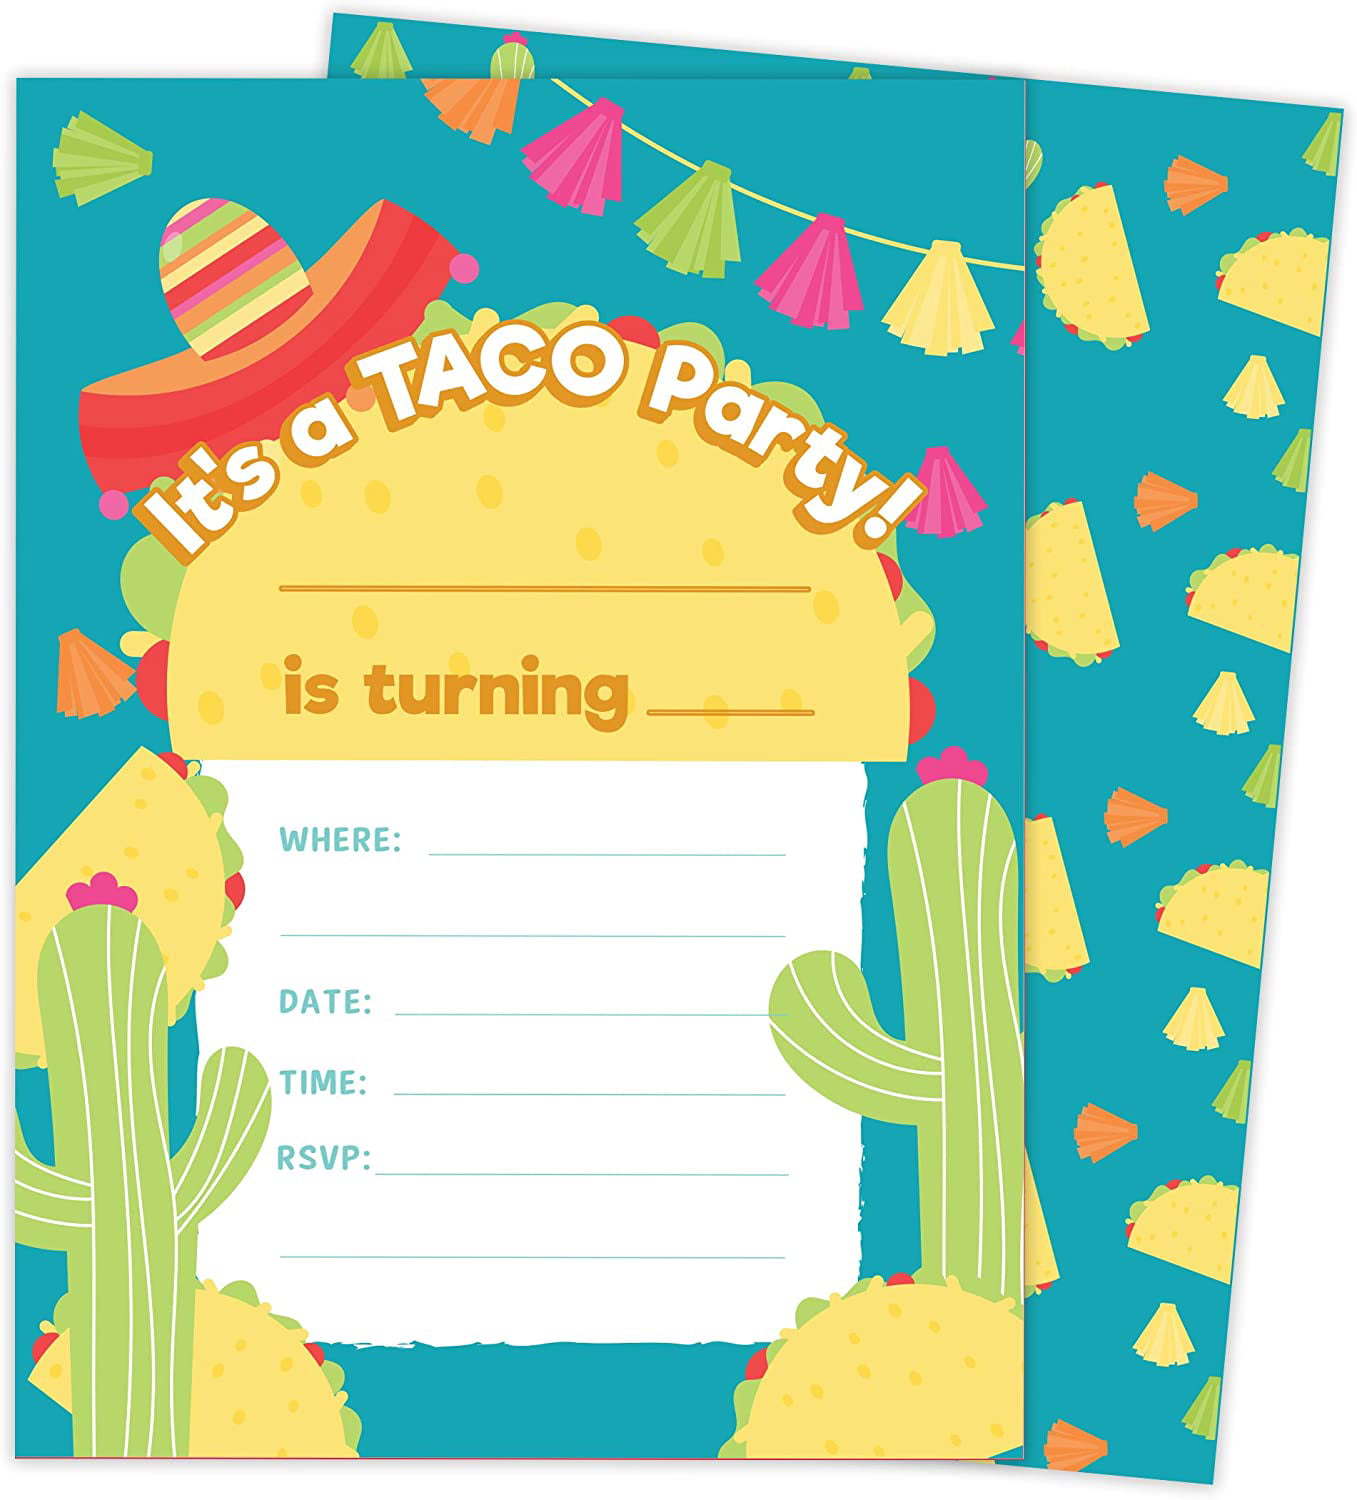 With Envelopes & Seal Stickers Vinyl Girls Boys Kids Party Desert Cactus 25 Count Movies 1 Happy Birthday Invitations Invite Cards